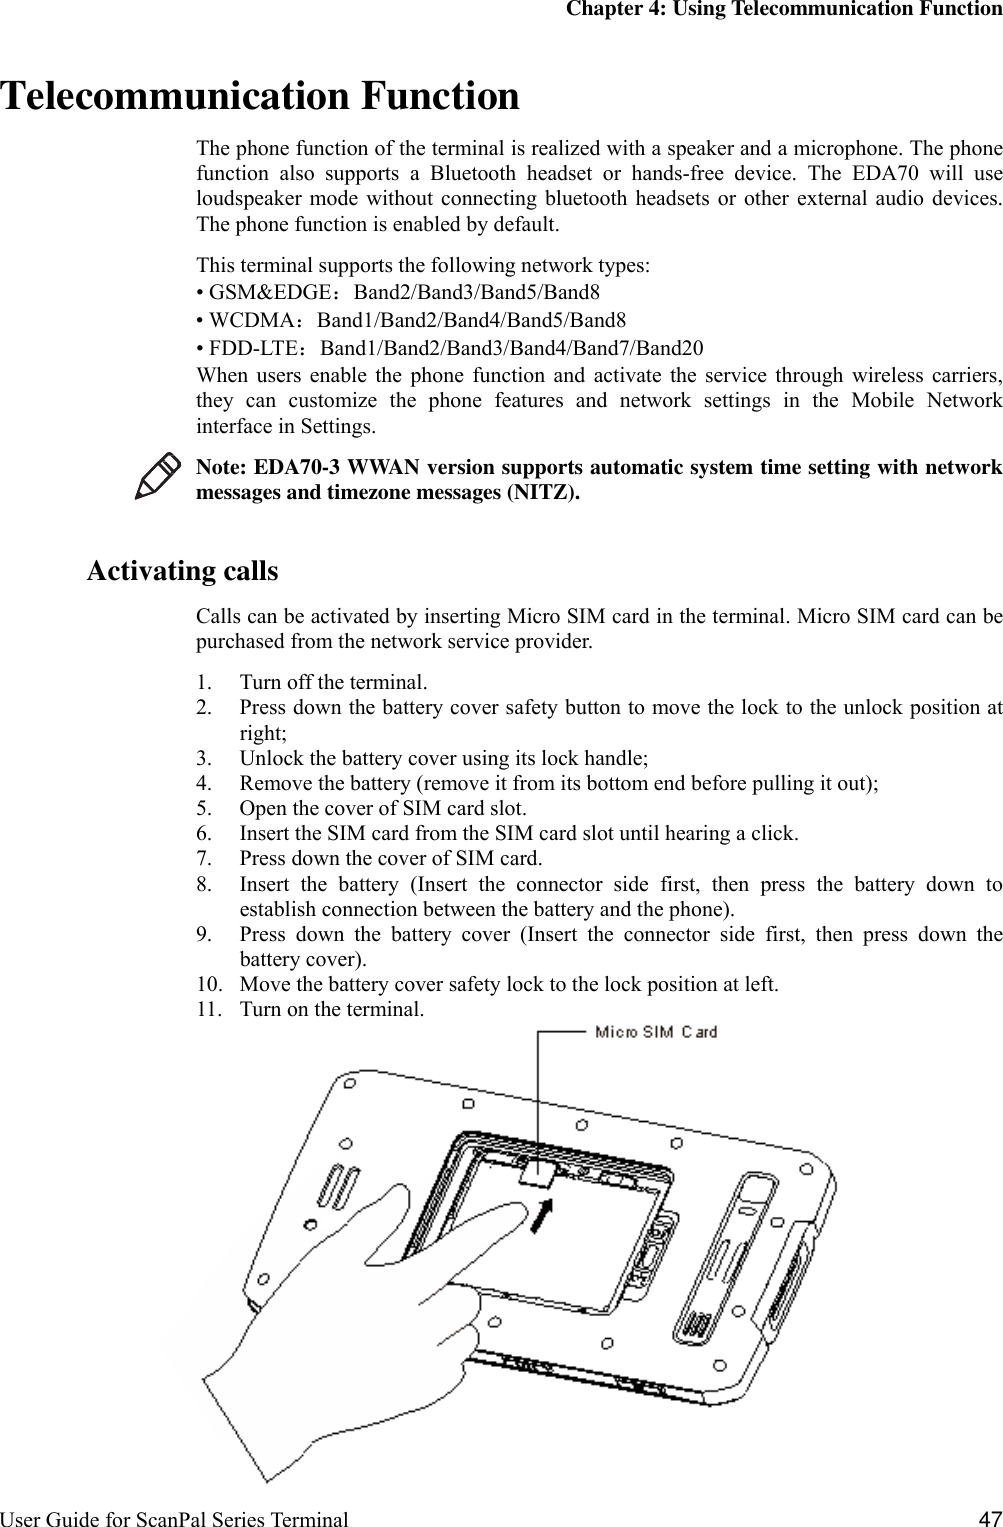 Page 53 of Honeywell EDA703 Tablet User Manual P1